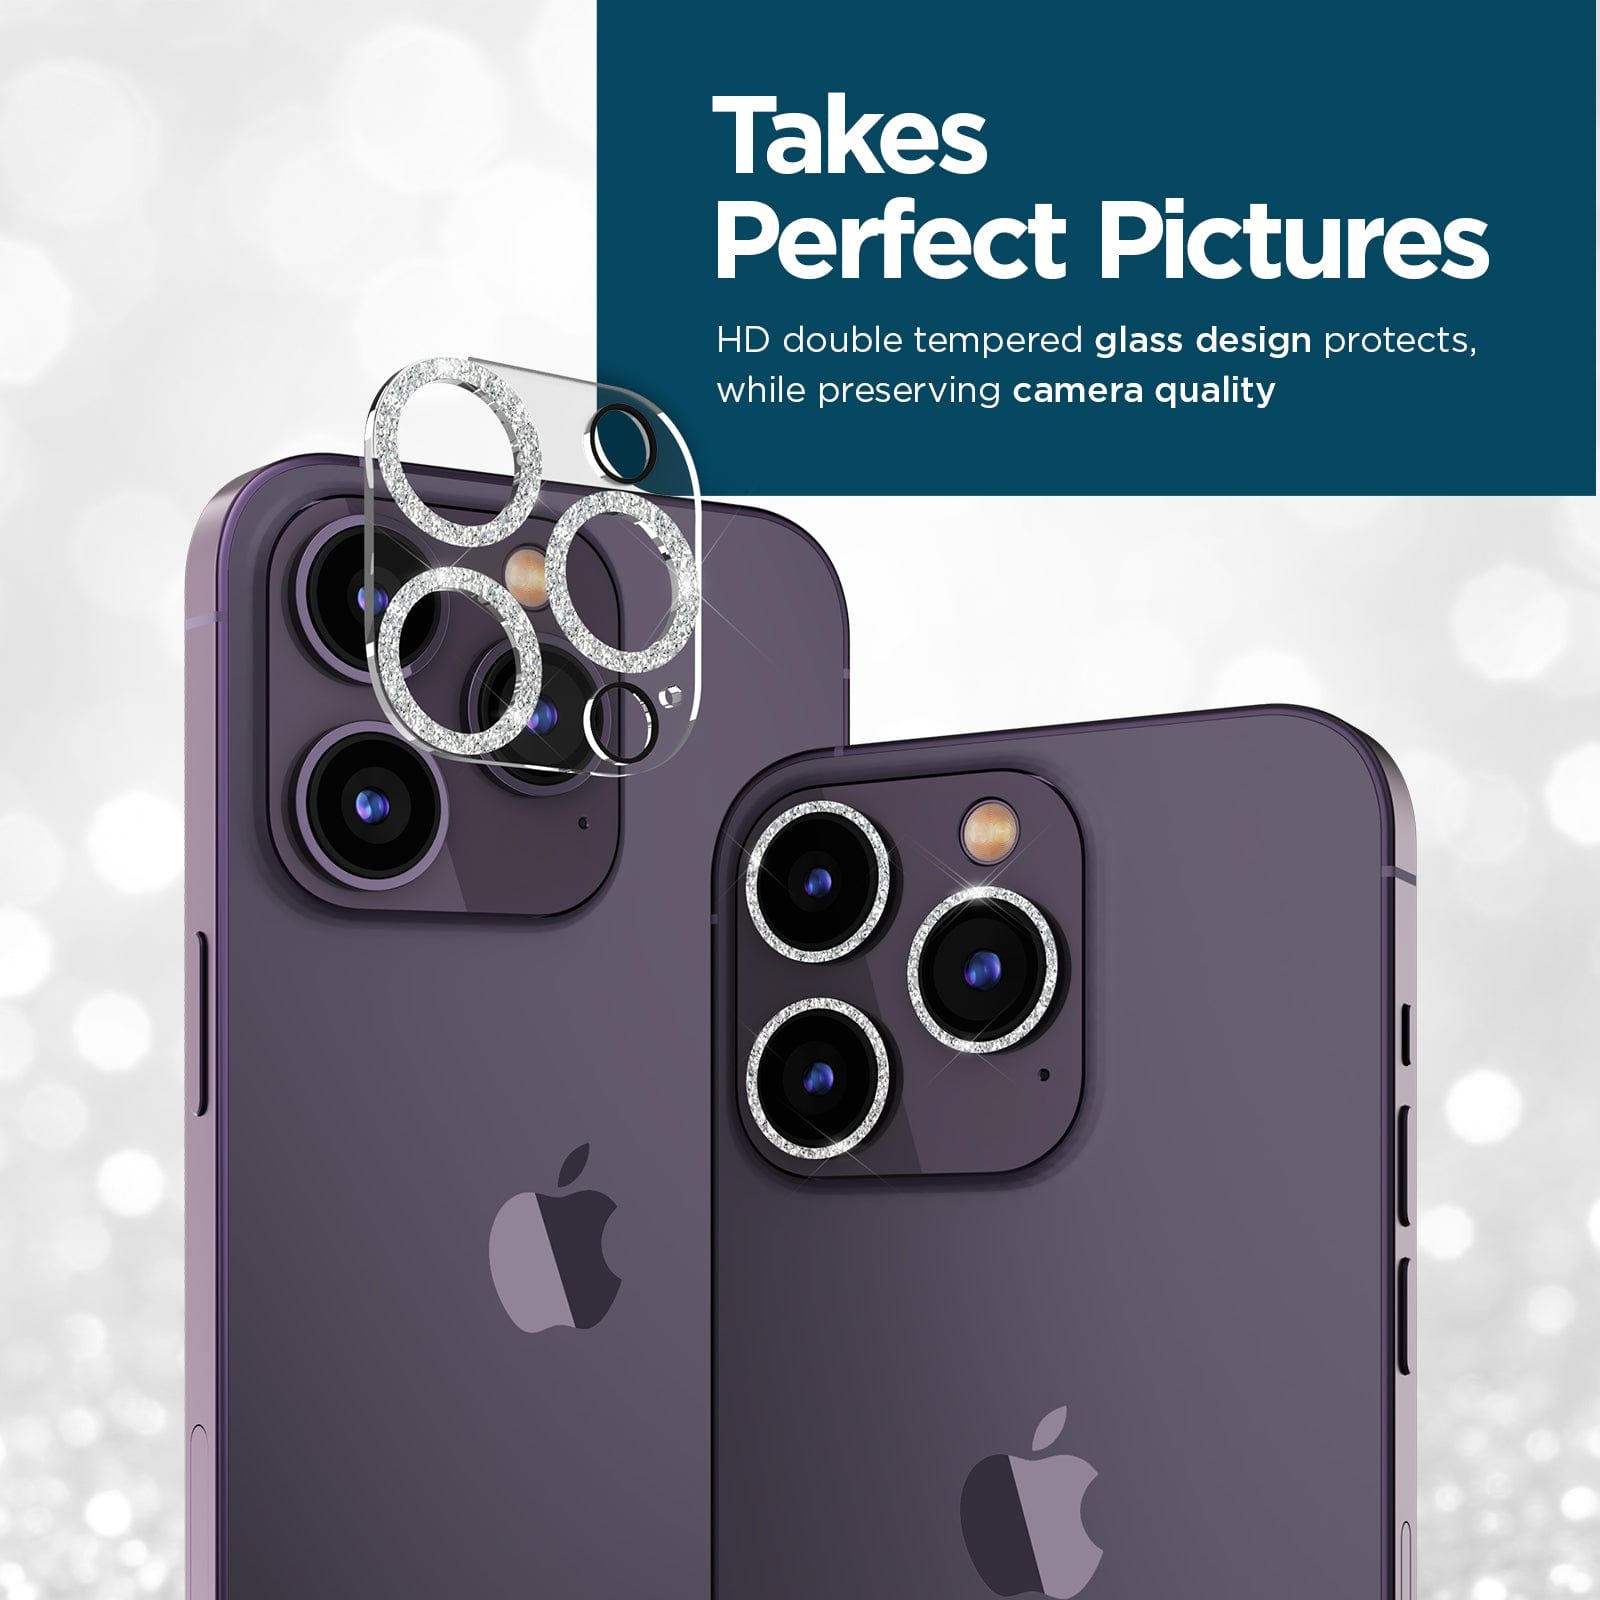 TAKES PERFECT PICTURES. HD DOUBLE TEMPERED GLASS DESIGN PROTECTS WHILE PRESERVING CAMERA QUALITY